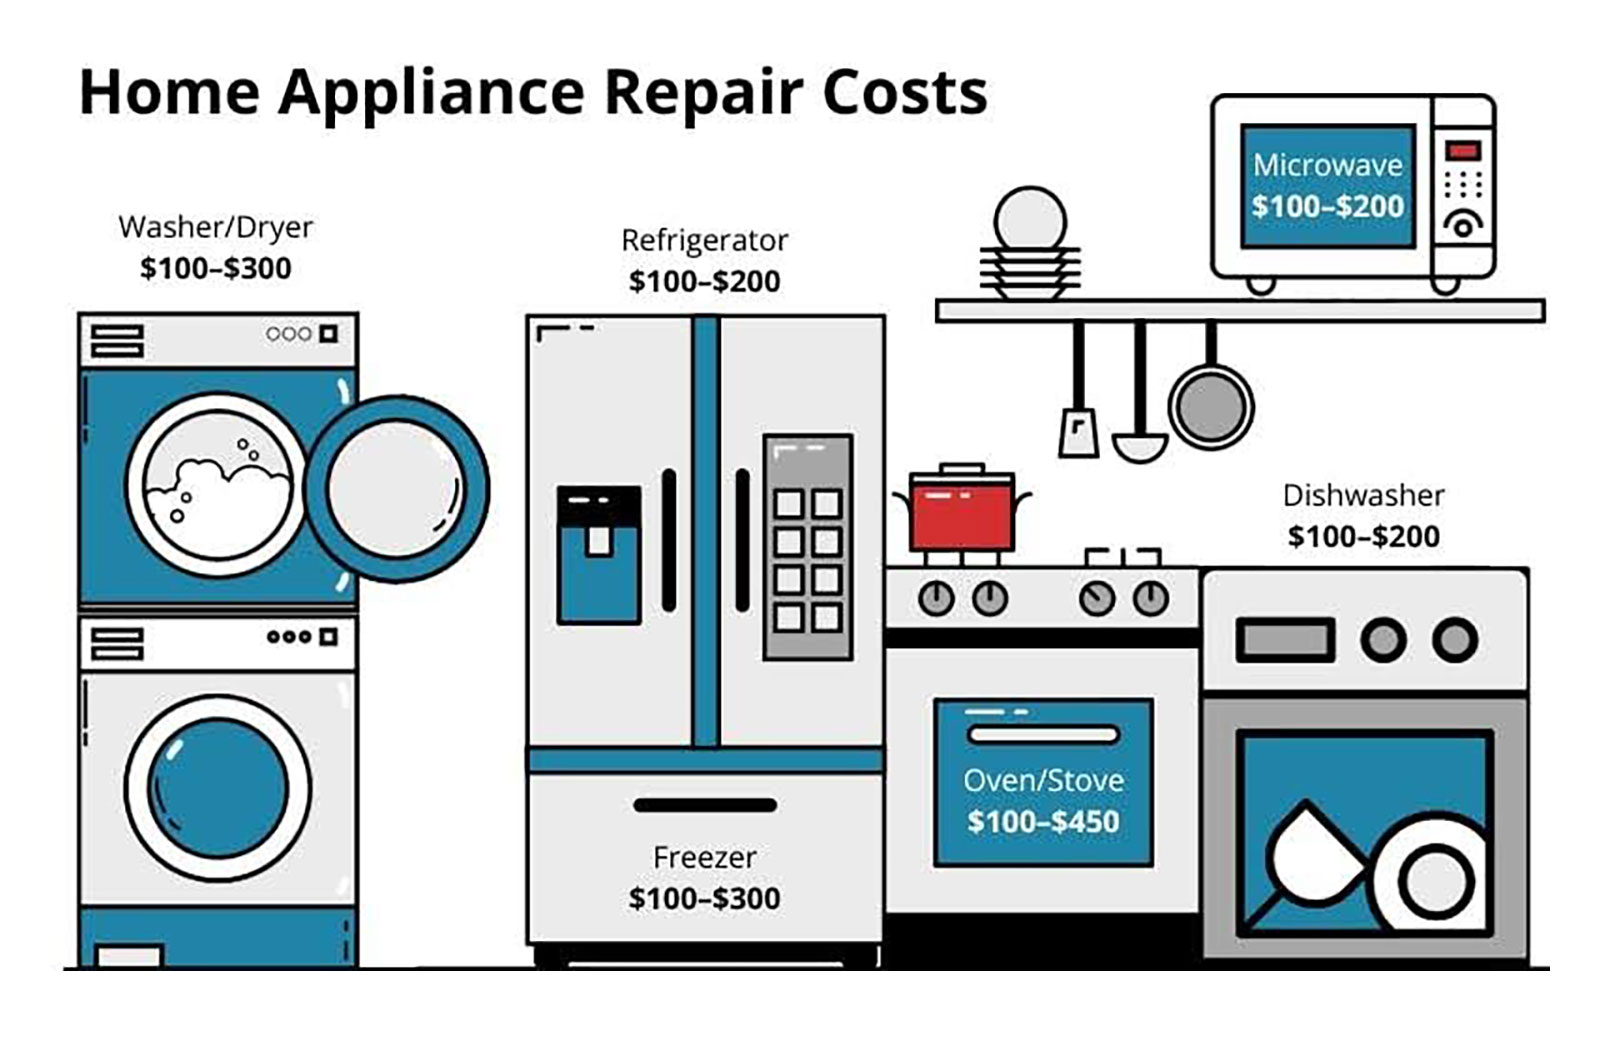 Home Appliance Repair Costs